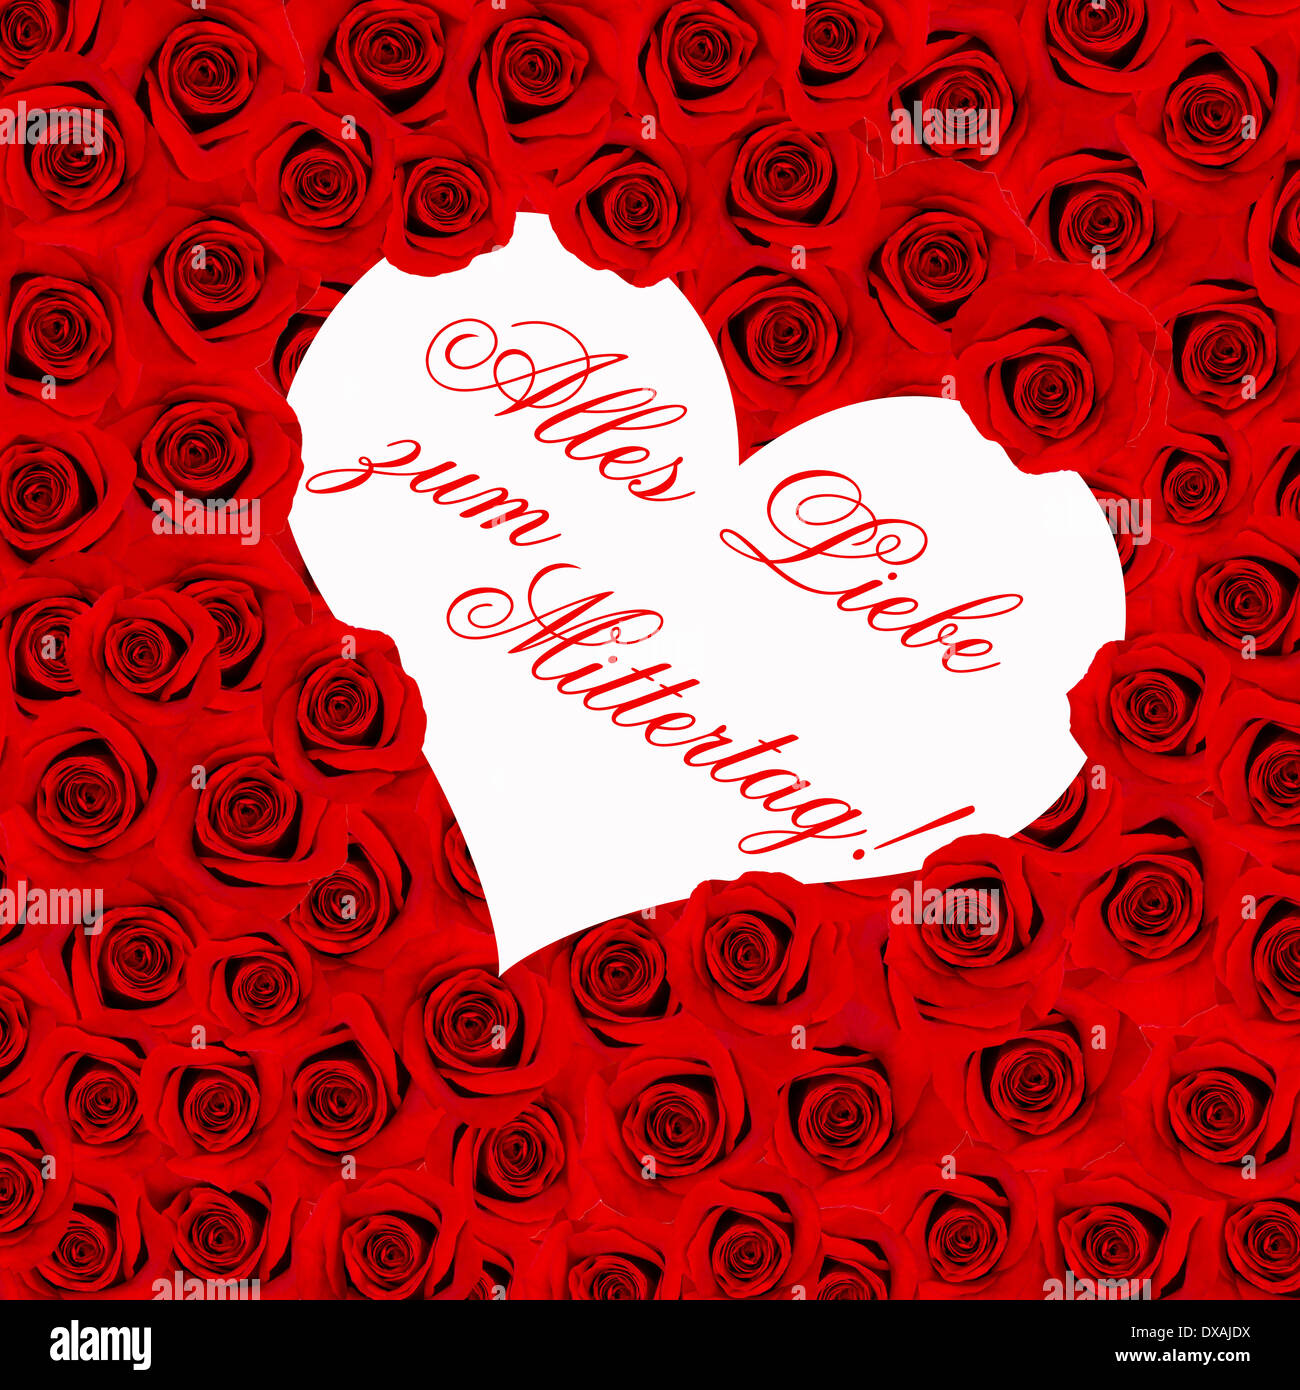 Red Roses Happy Mothers Day Card Concept Germany Stock Photo Alamy